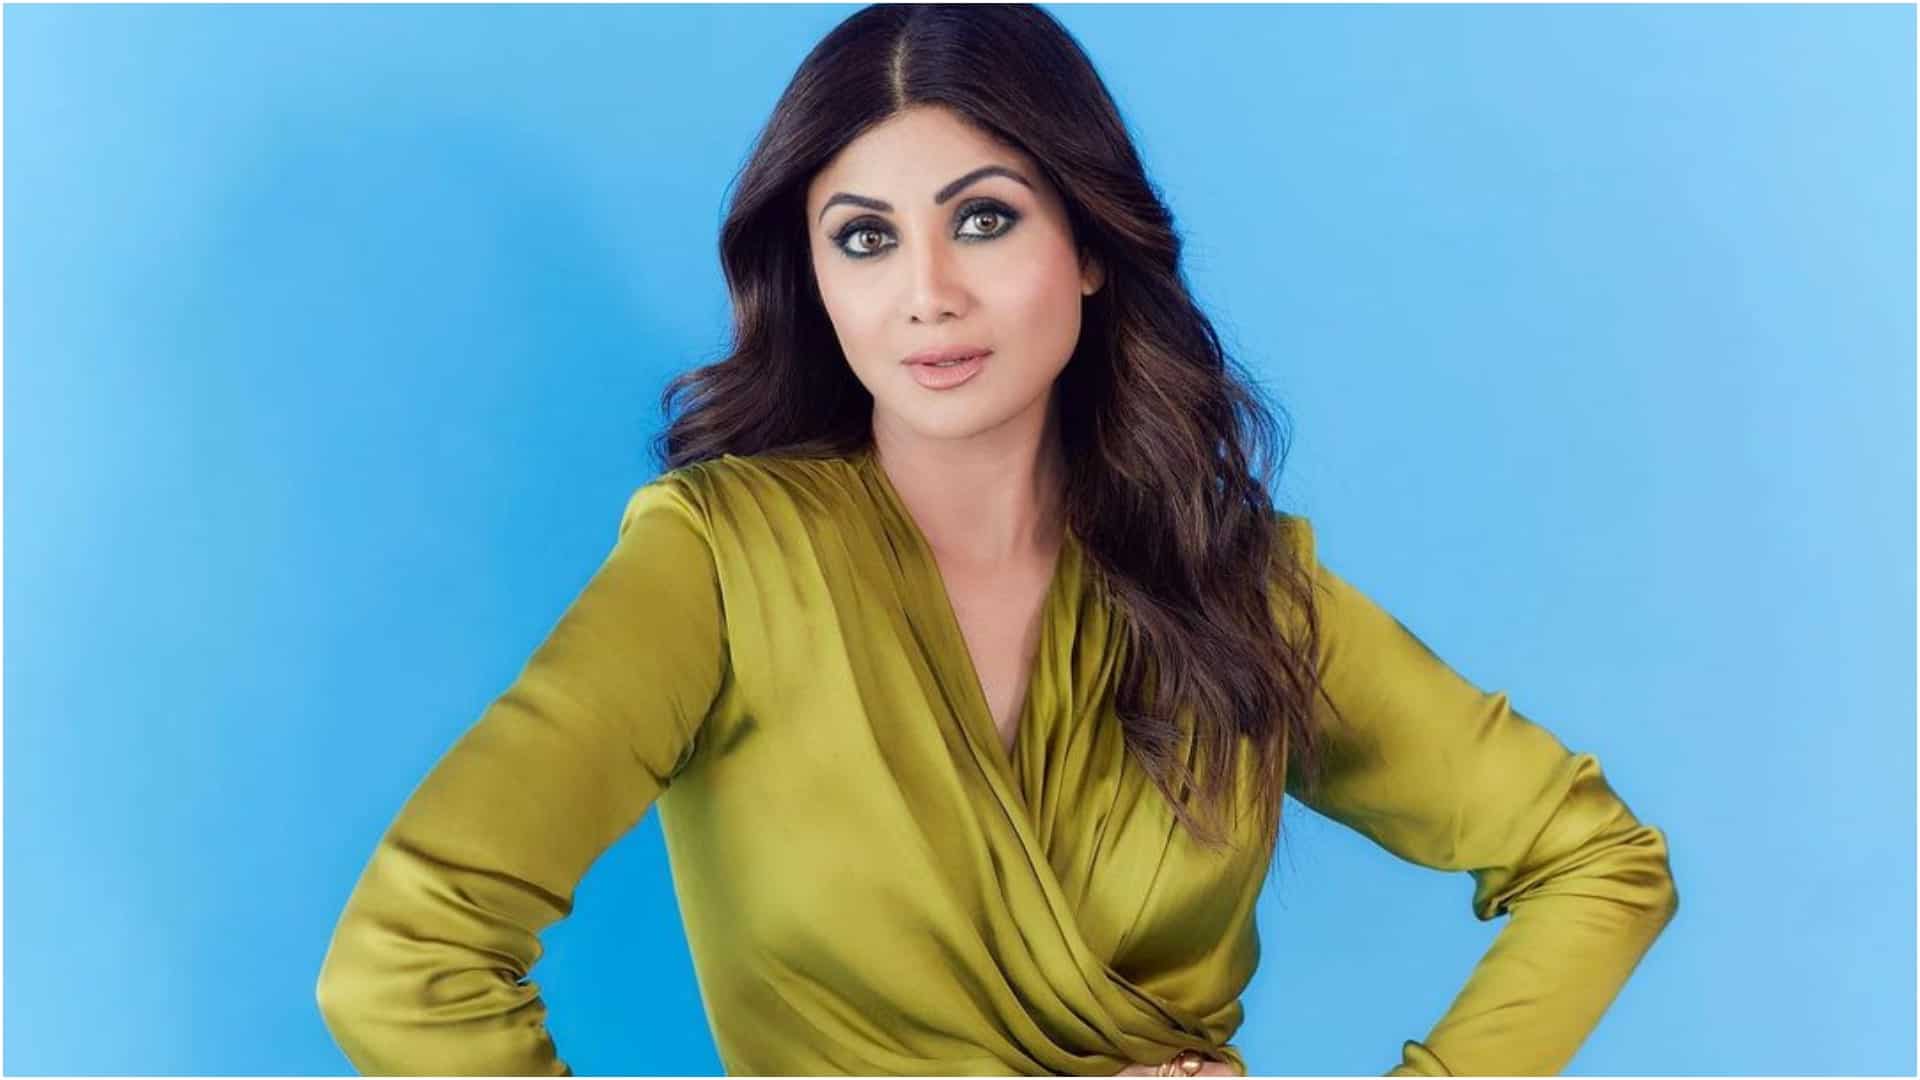 Shilpa Shetty Kundra meets Salman Khan amid ED heat, her mom joins in days after attack at Galaxy Apartments